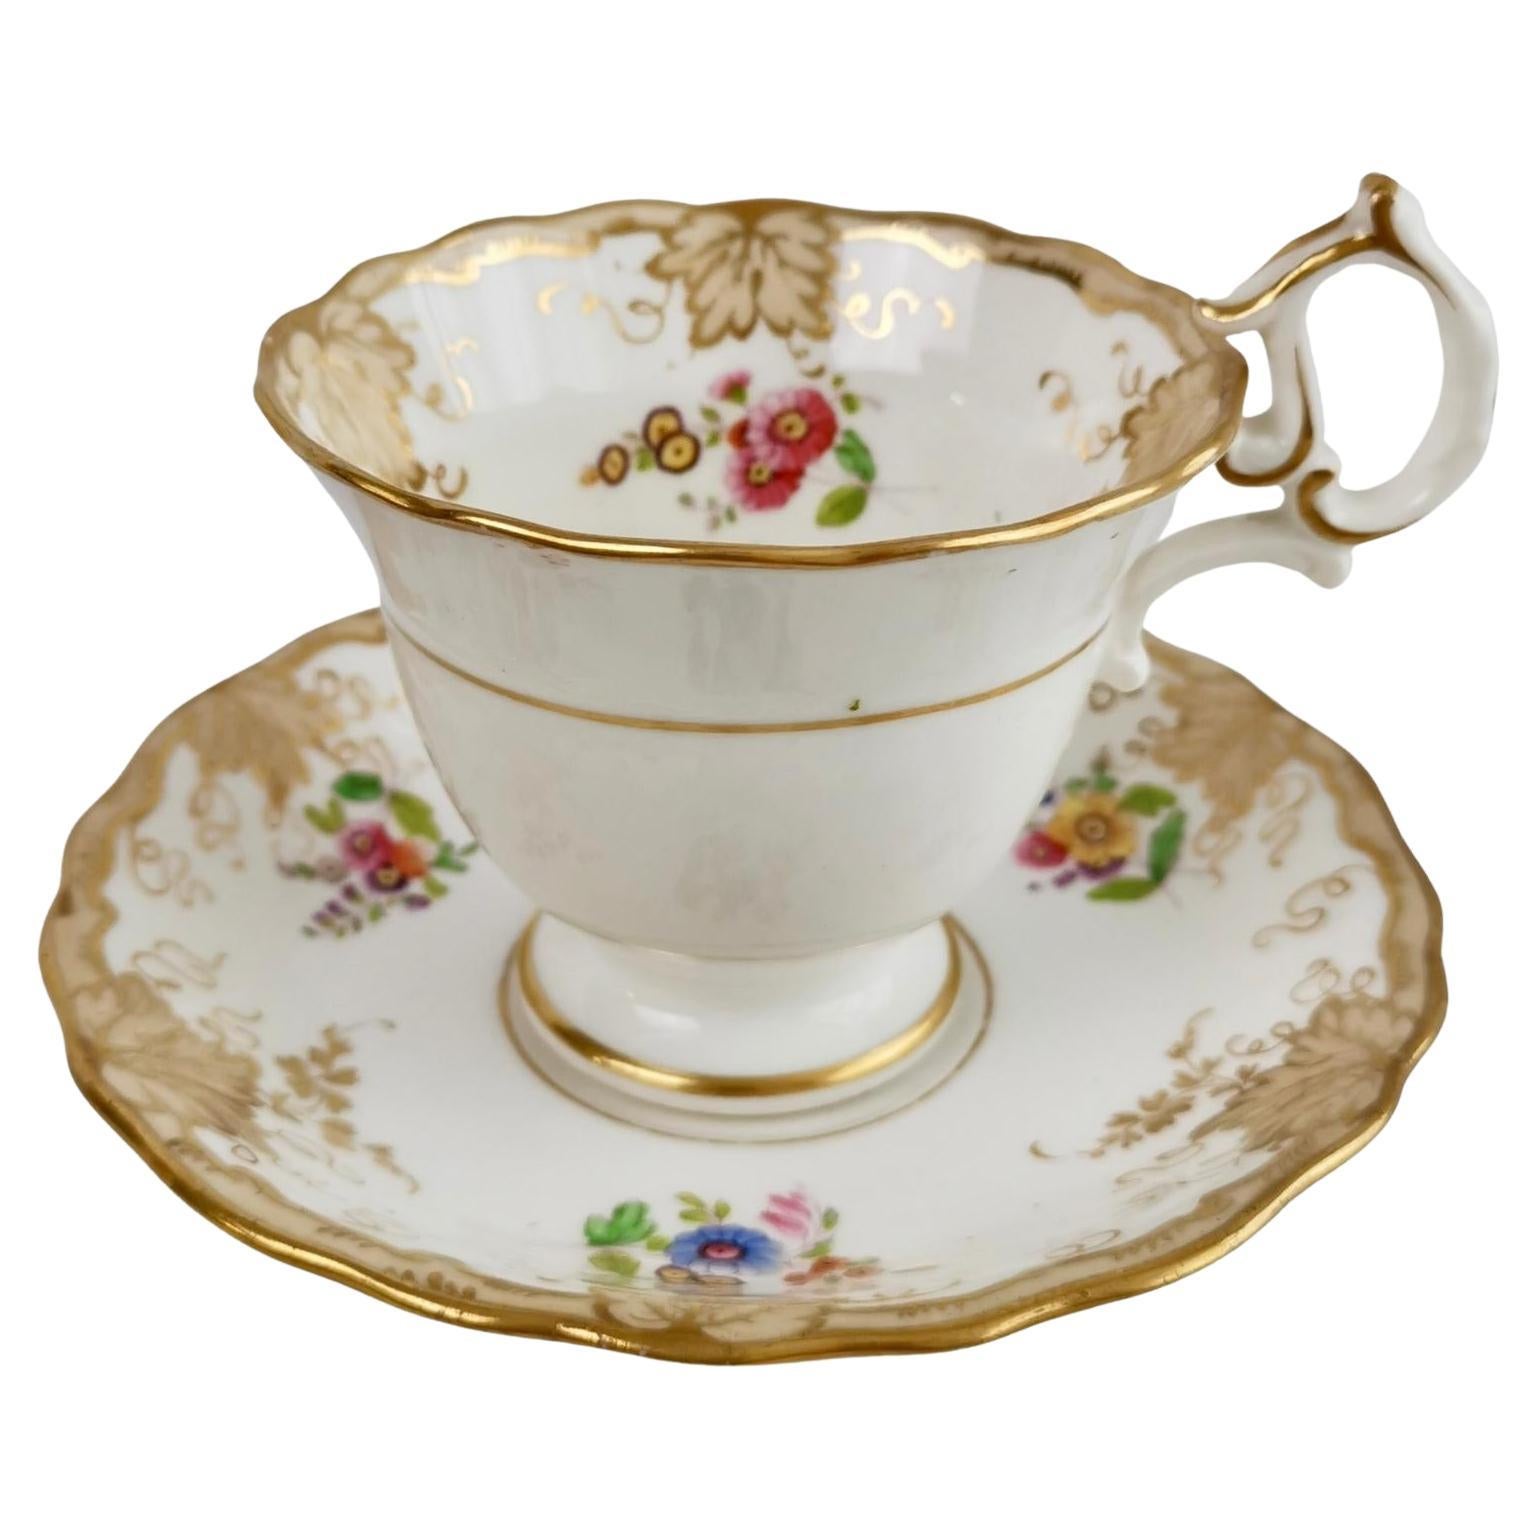 H&R Daniel Coffee Cup, White, Grey with Printed Flowers, Rococo Revival, ca 1838